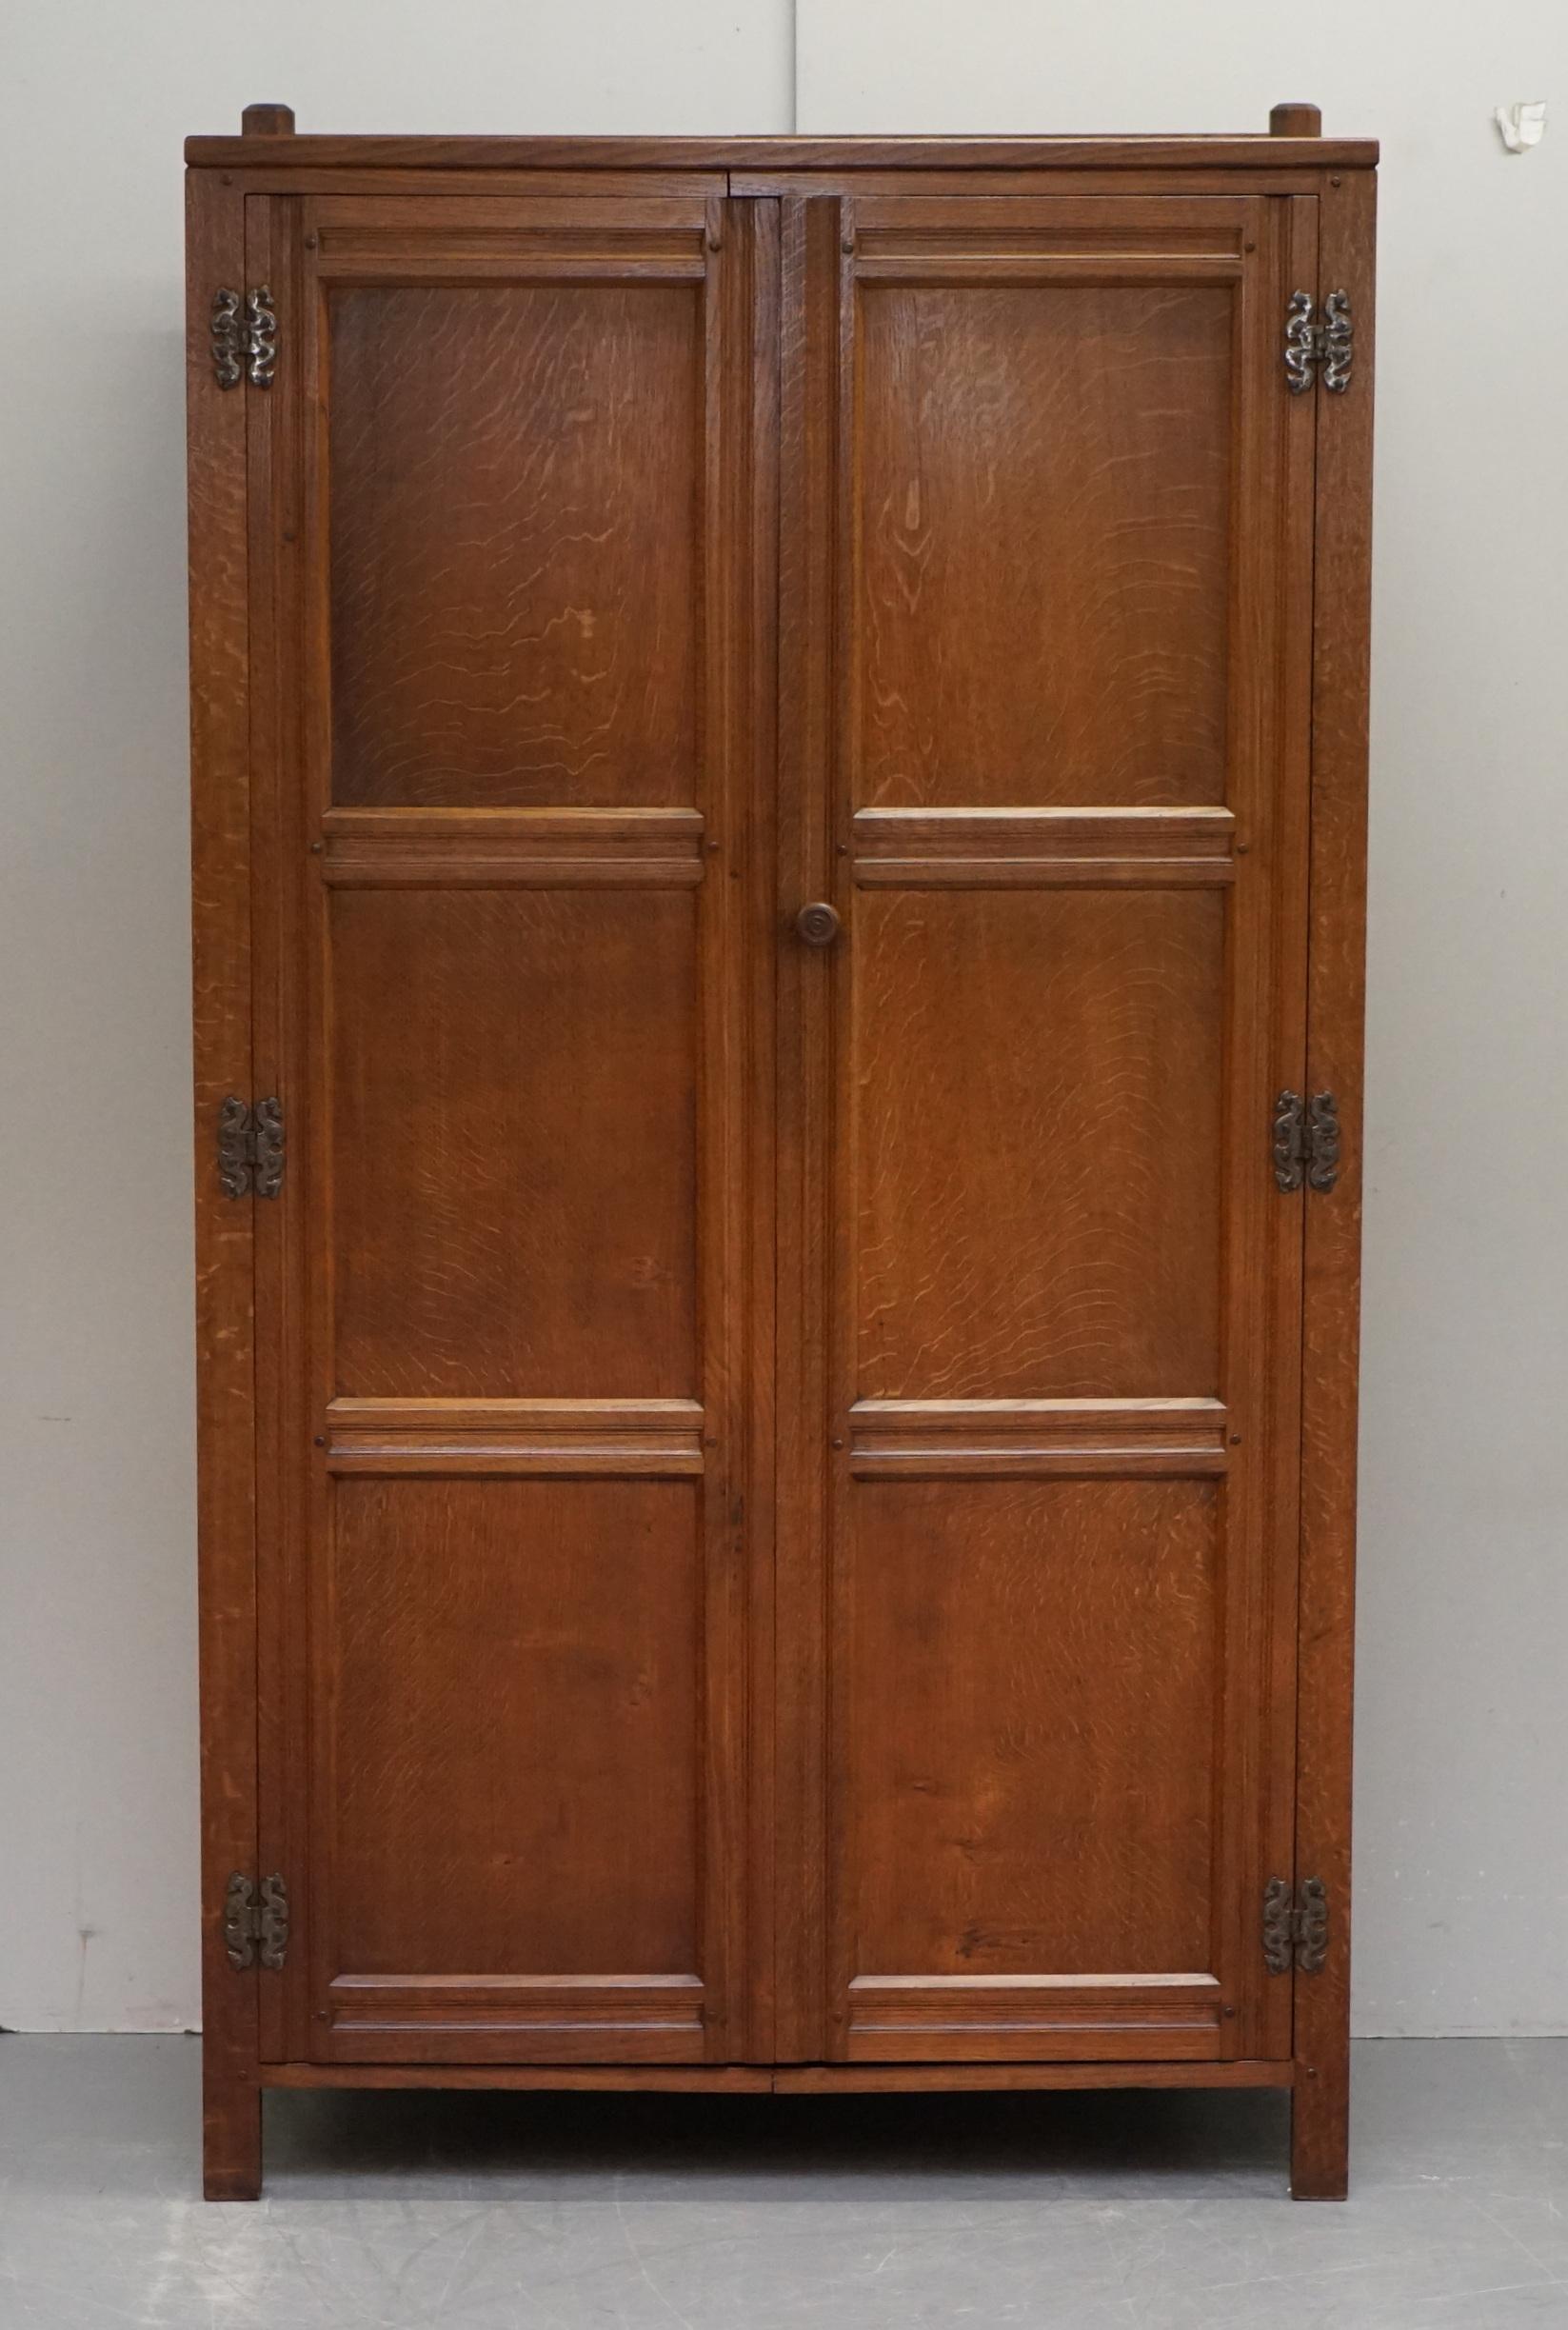 We are delighted to offer for sale this lovely circa 1950s Cotswold School English Oak Wardrobe with twin hanging rails

A very good looking well made and traditional English wardrobe. This piece comes with all the original hardware which is very